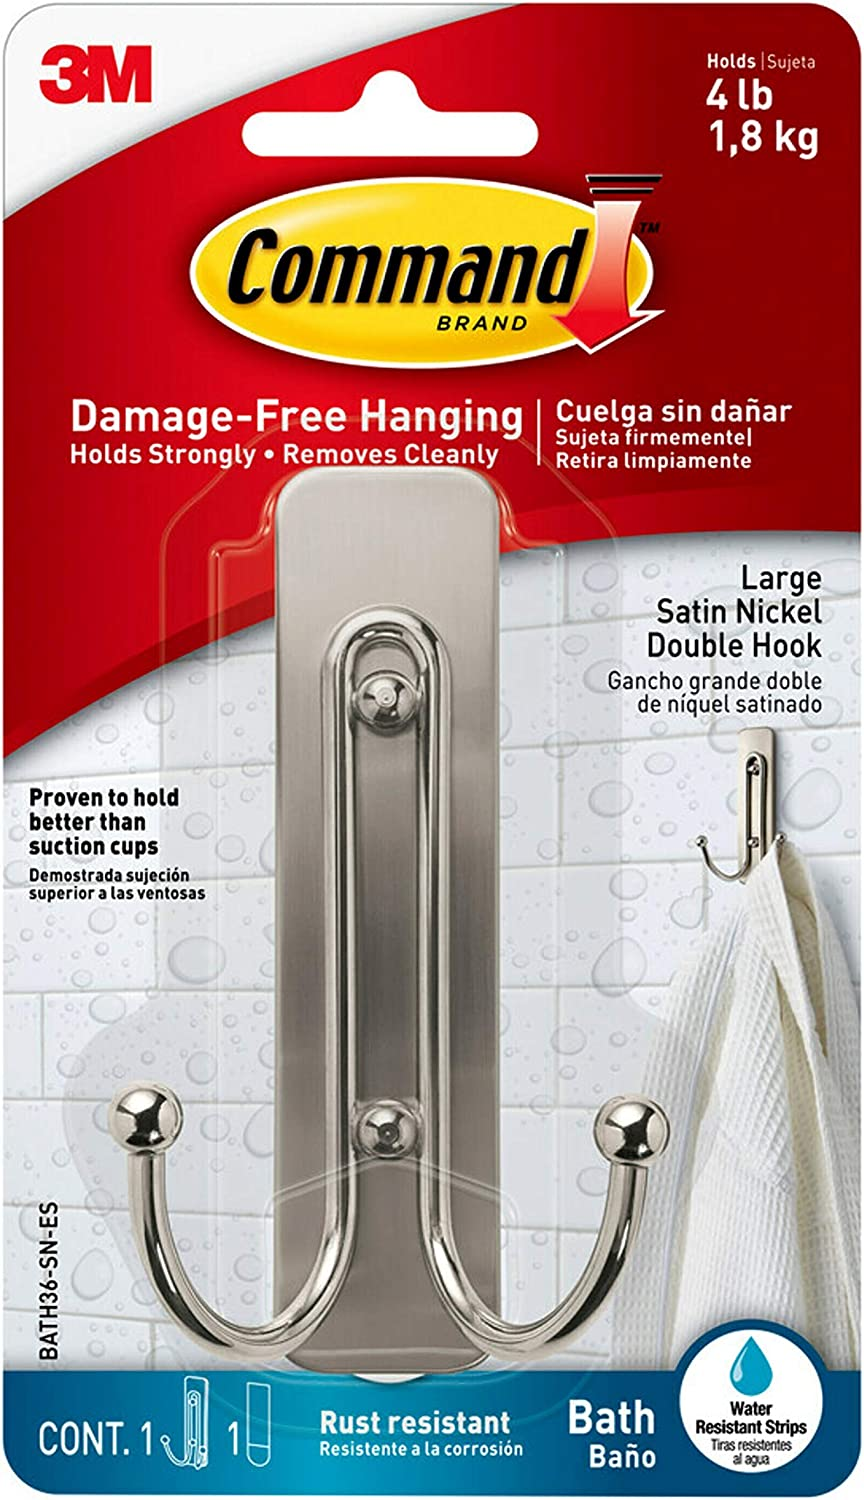 Command Large Double Bathroom Wall Hook (Satin Nickel) $5.59 at Amazon and Target